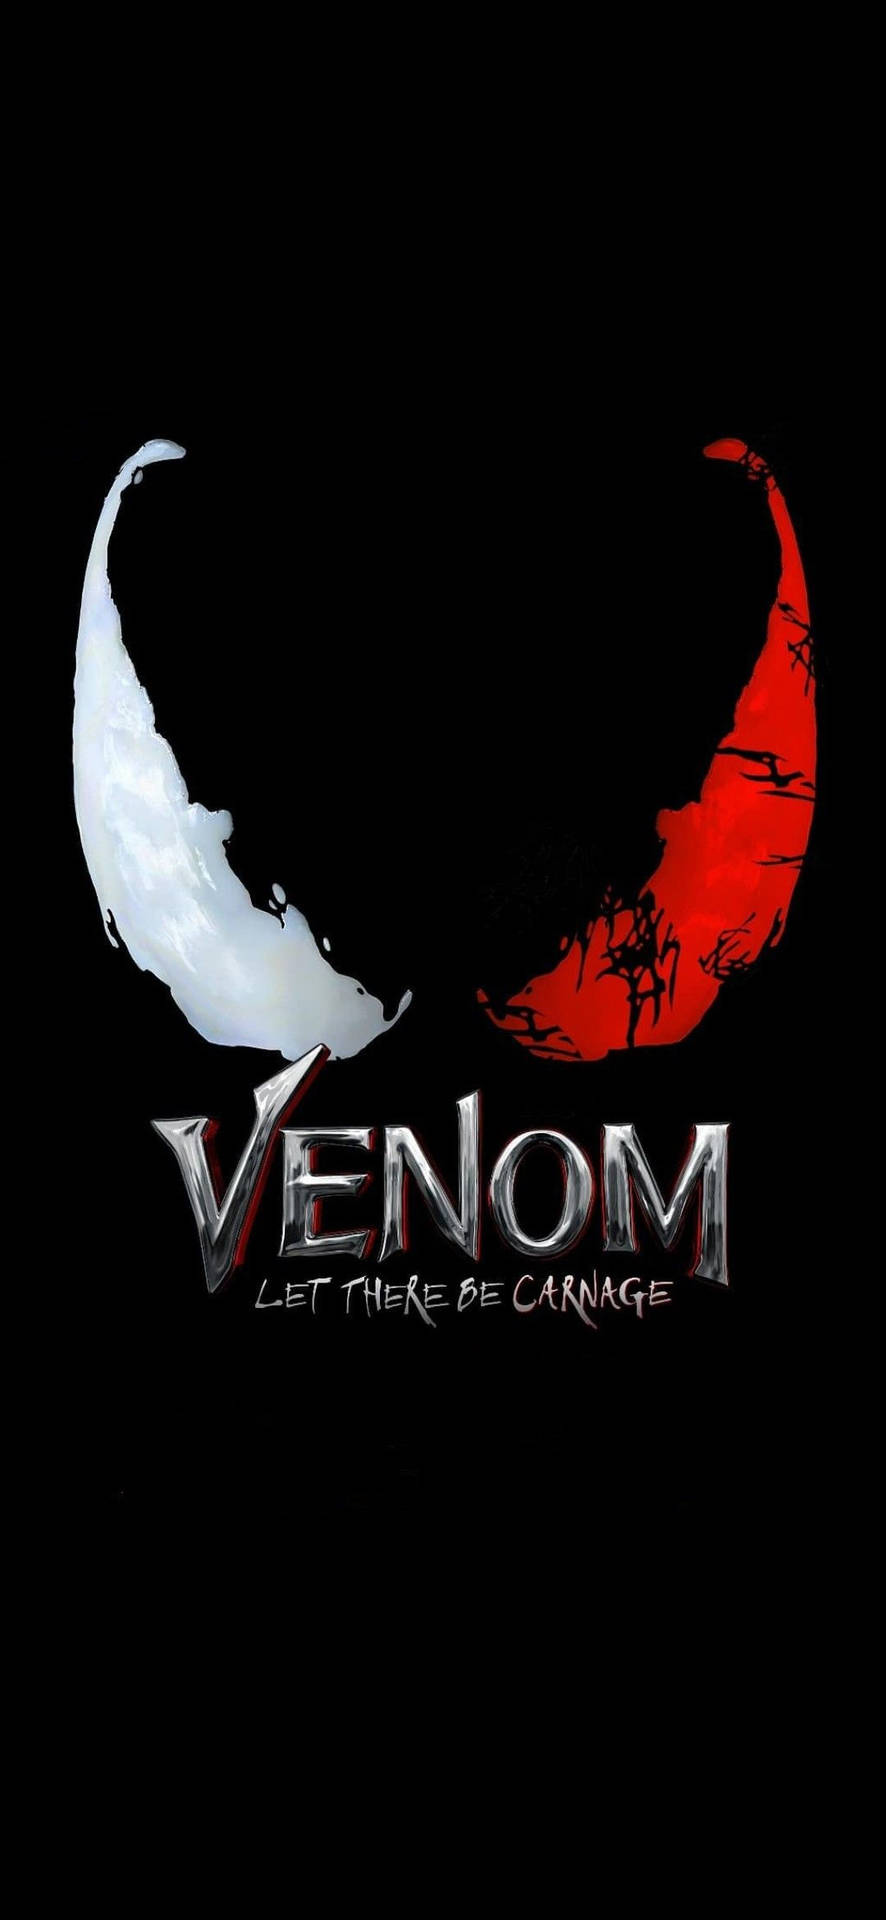 Venom Let There Be Carnage Redeye Wallpaper